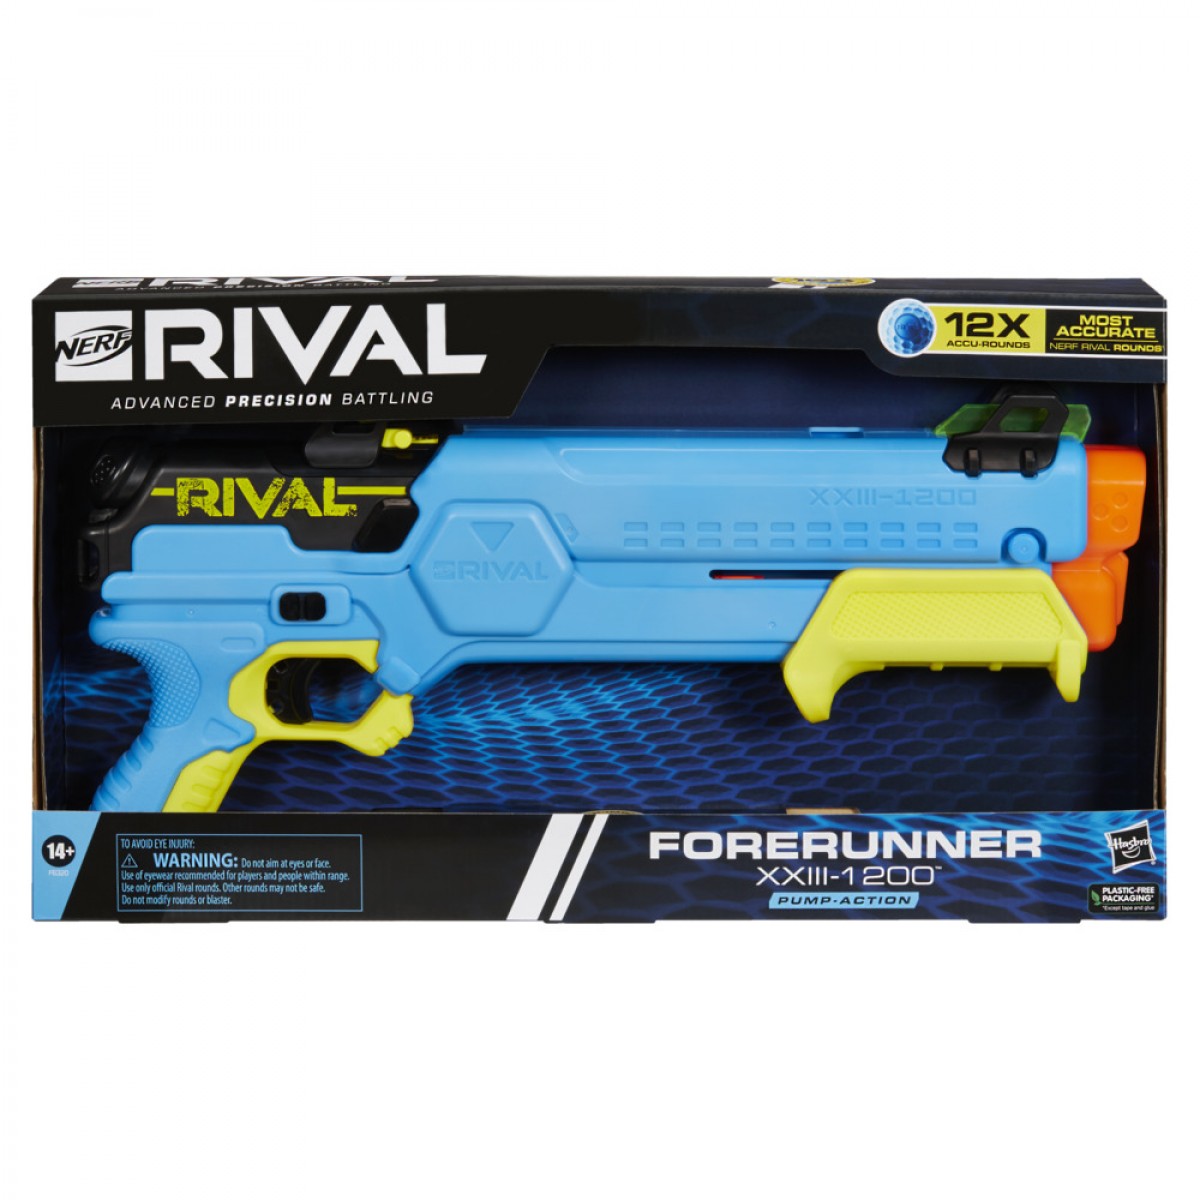 Nerf Rival Pilot Xxiii-100 Blaster, Break-Barrel Load, T-Bar Priming, 2 Nerf Rival Accu-Rounds, Most Accurate Nerf Rival System, 90 Fps, 14Yrs+, Multicolour